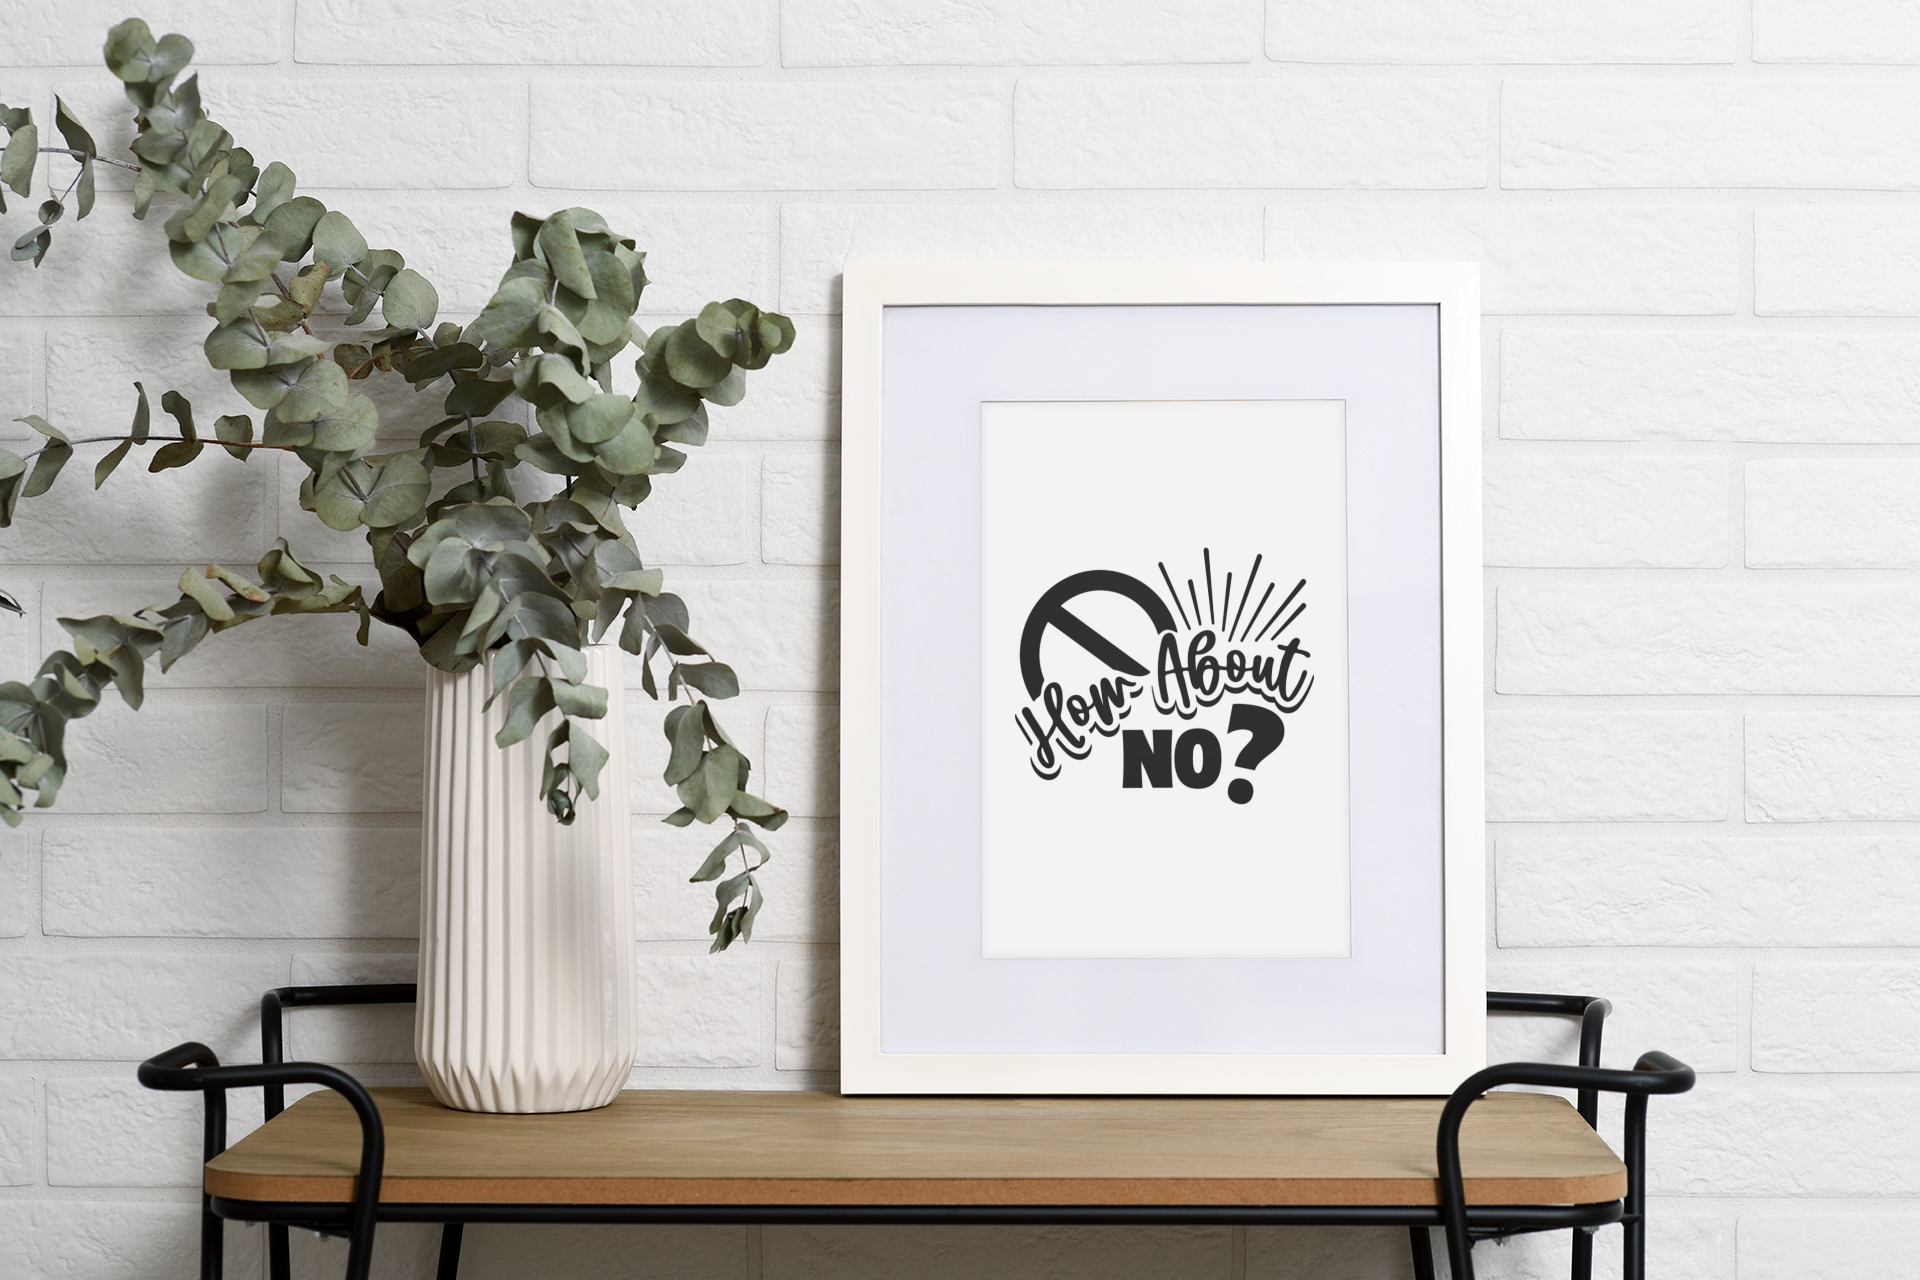 How About NO? - Trendy Wall print | Trendy Digital Print | Trendy Wall Art | Wall Decor | Christian Poster | Wall Poster